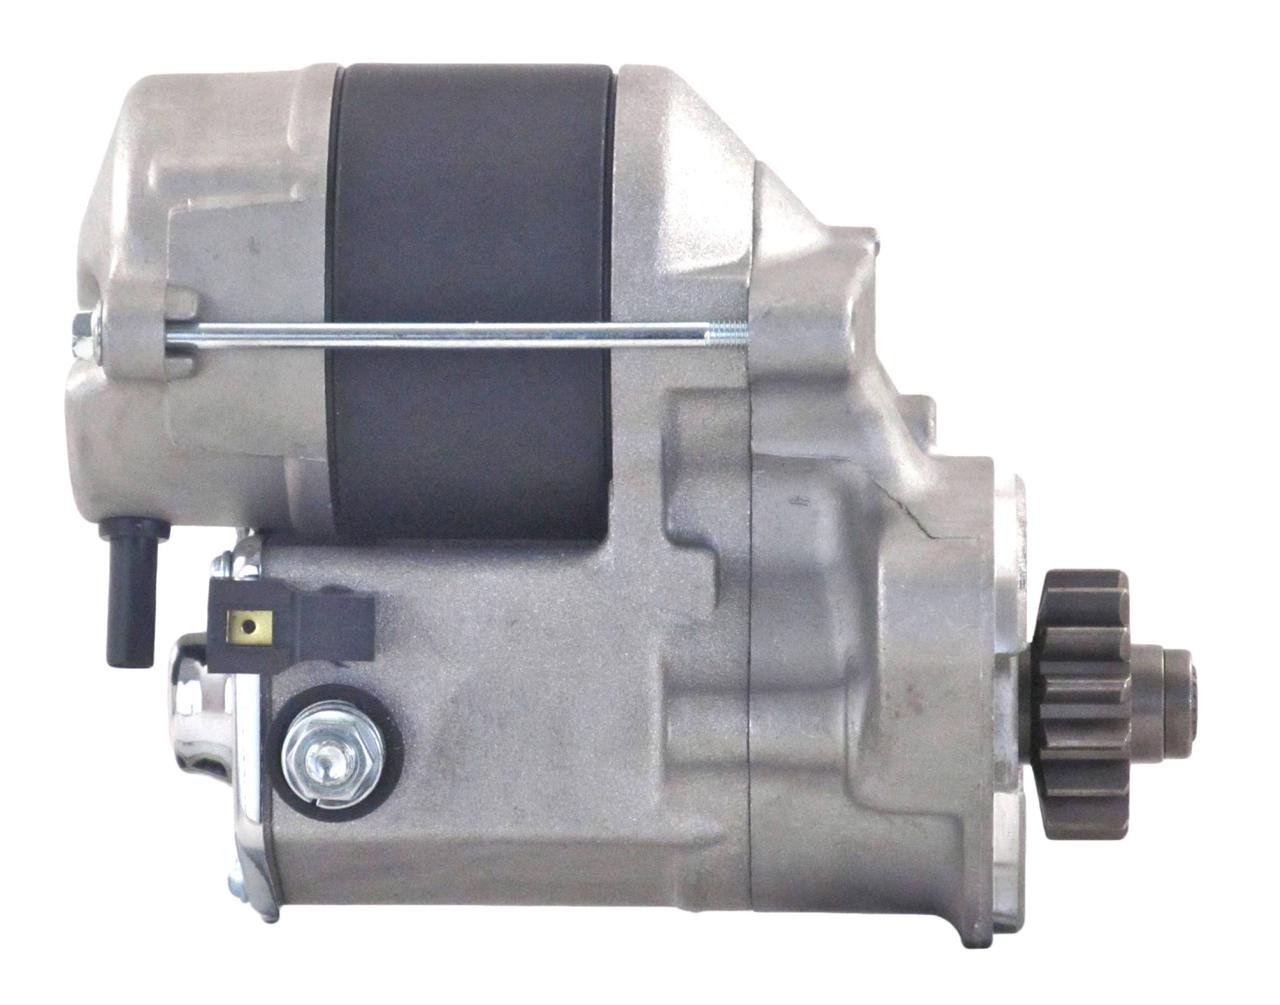 Rareelectrical NEW STARTER MOTOR COMPATIBLE WITH ISEKI TMG18 TRACTOR 1280004811 1280004812 6281-100-003-0